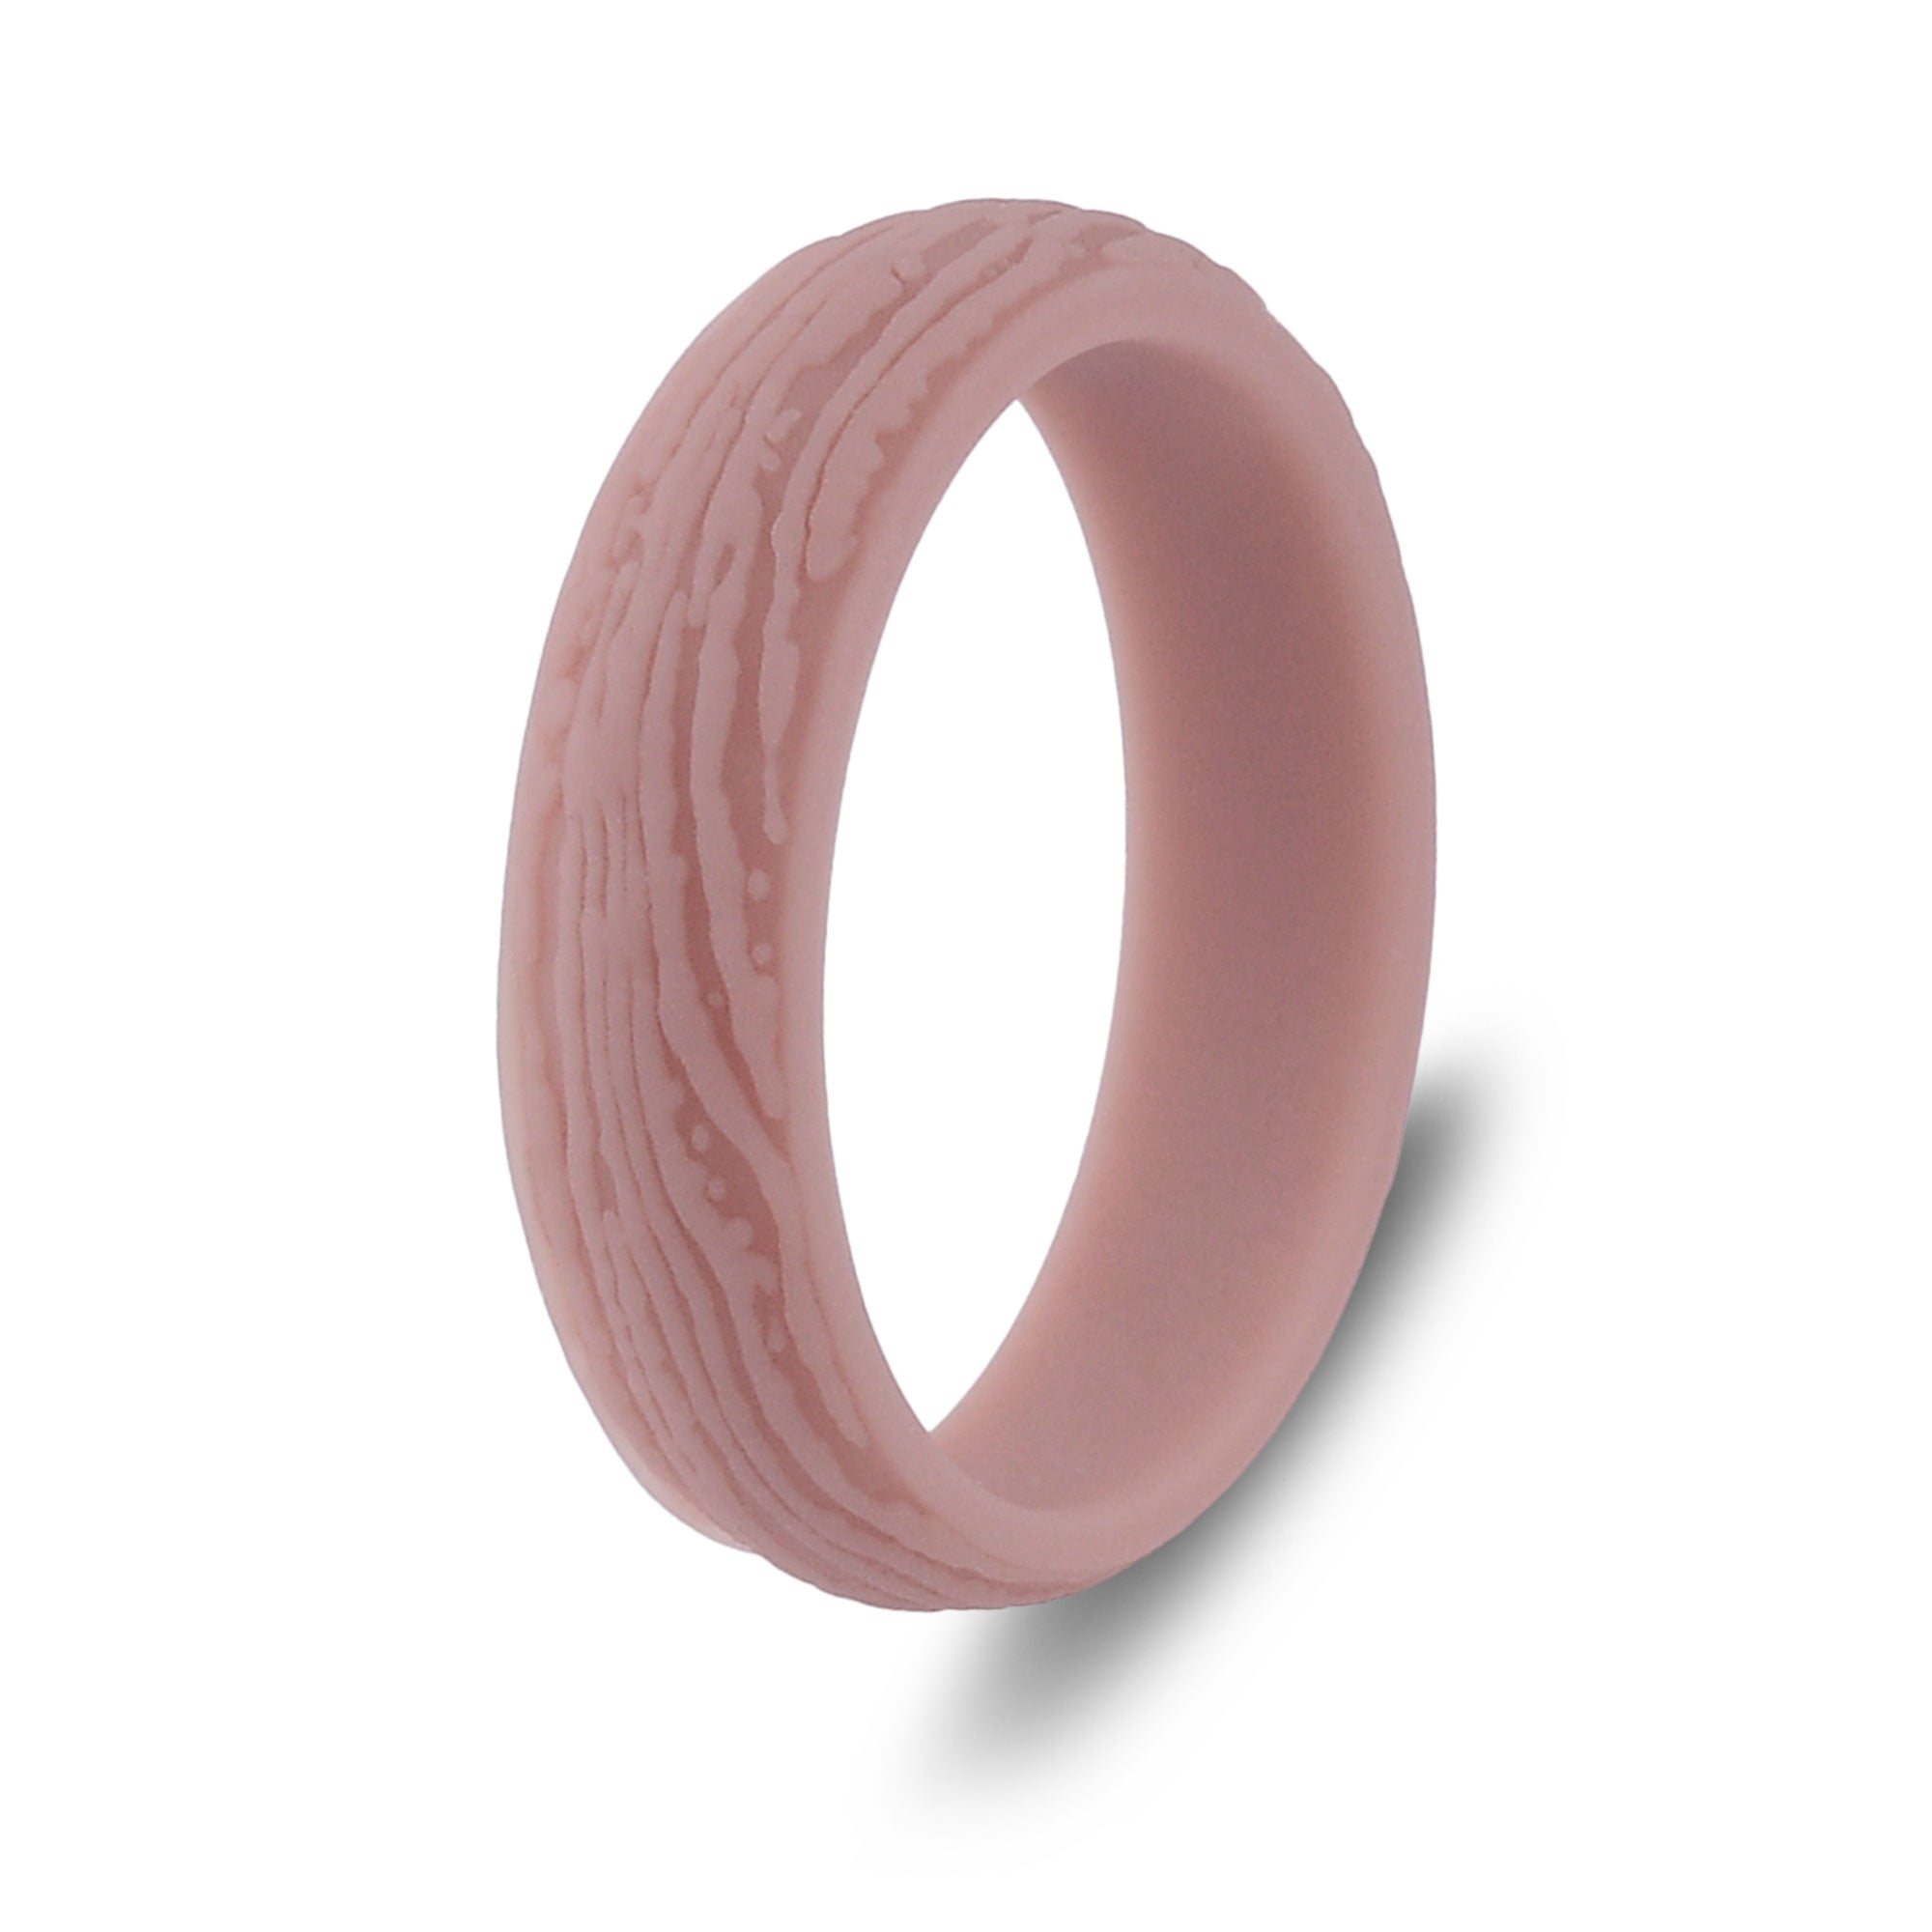 The Rosewood - Silicone Ring